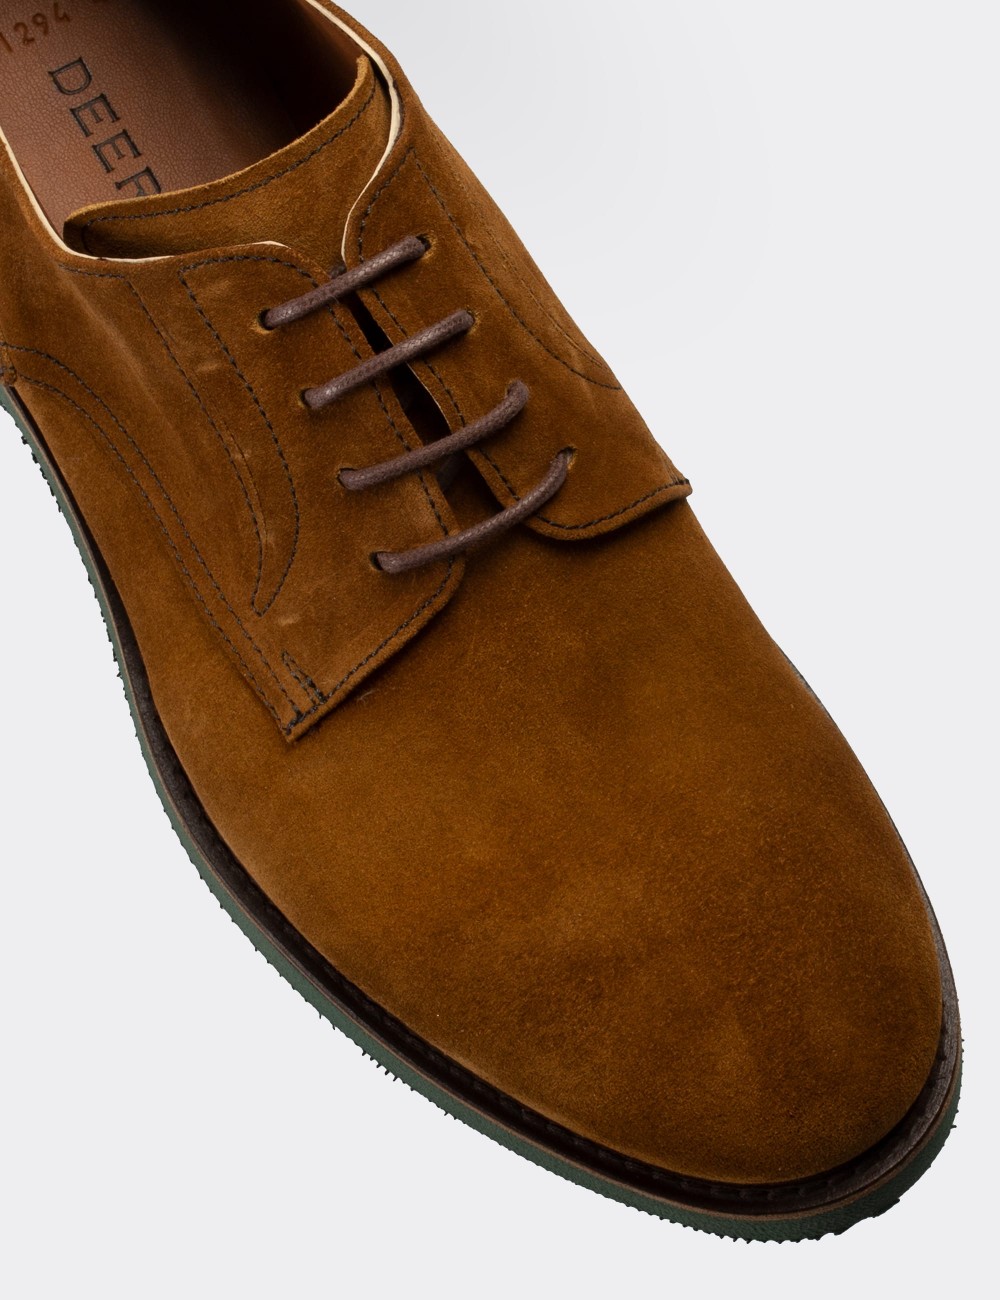 Tan Suede Leather Lace-up Shoes - 01294MTBAE12